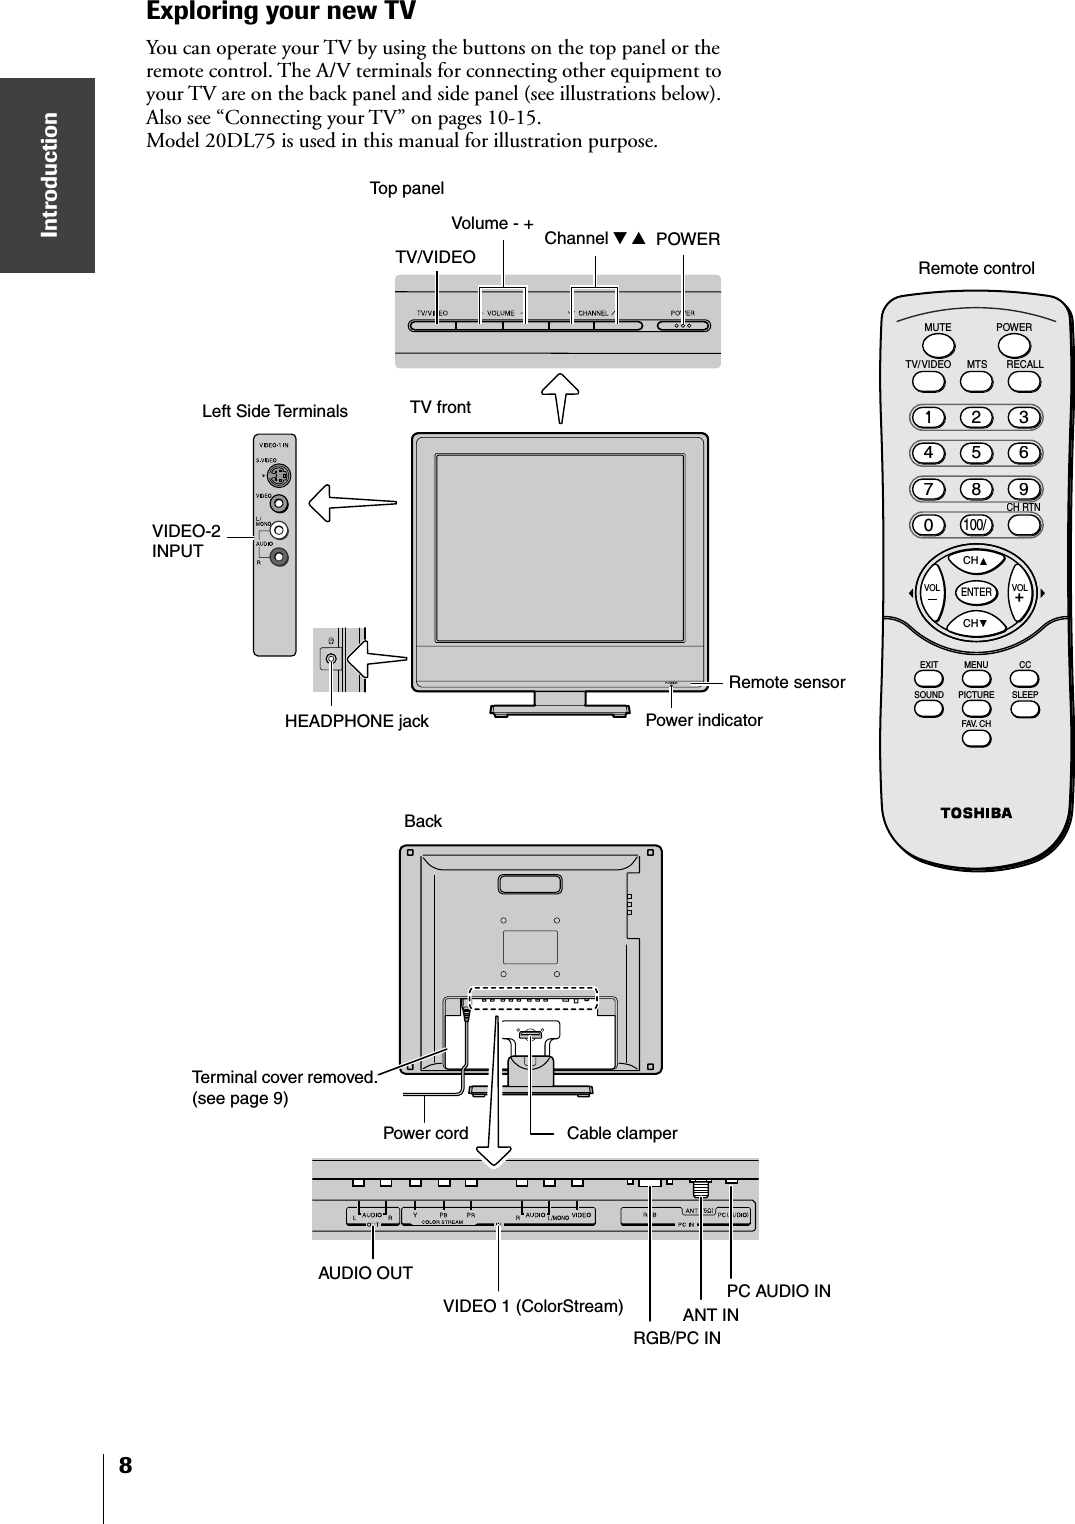 Introduction8BackCHCHRECALLTV/VIDEOMUTEPOWERMTSCH RTNCENTERCCEXIT MENUSLEEPSOUND PICTUREFAV. CHVOL VOL21135468709100/TV frontVolume - + Channel zyRemote sensorRemote controlVIDEO-2INPUTTV/VIDEOHEADPHONE jack Power indicatorANT INAUDIO OUTPower cordPOWERTop panelLeft Side TerminalsTerminal cover removed.(see page 9)Exploring your new TVYou can operate your TV by using the buttons on the top panel or theremote control. The A/V terminals for connecting other equipment toyour TV are on the back panel and side panel (see illustrations below).Also see “Connecting your TV” on pages 10-15.Model 20DL75 is used in this manual for illustration purpose.VIDEO 1 (ColorStream)RGB/PC INPC AUDIO INCable clamper